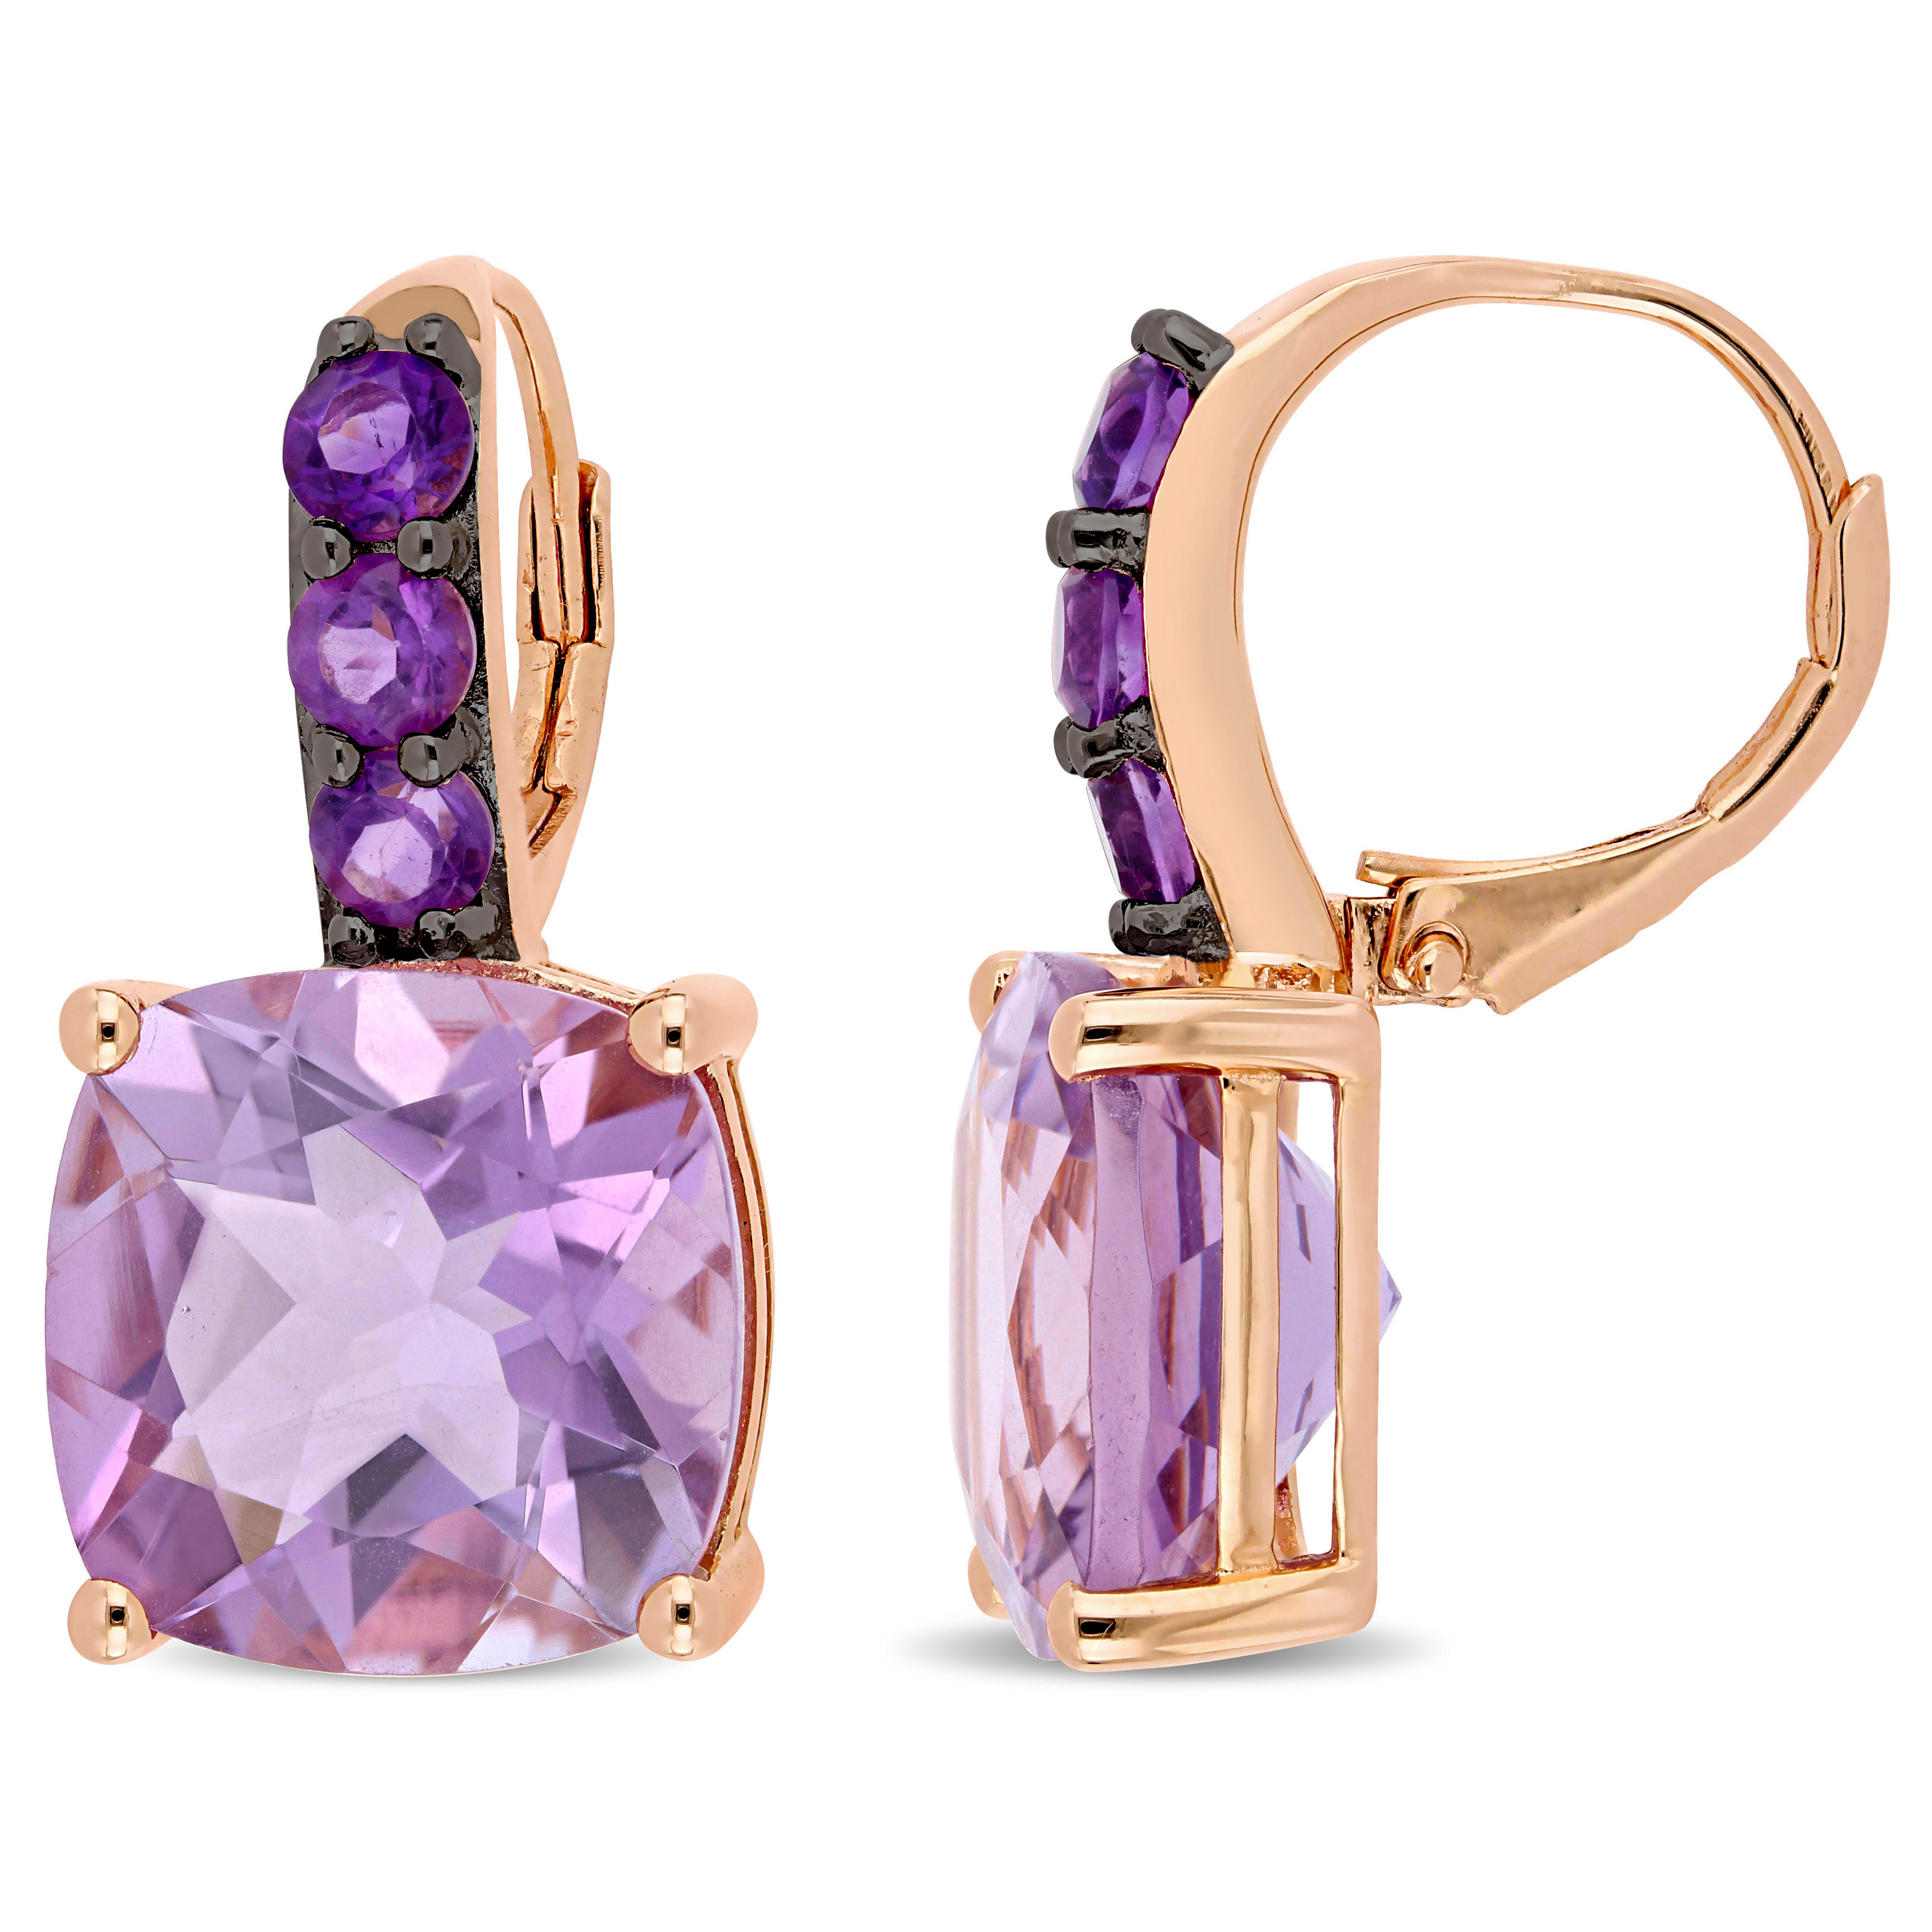 15 1/2 CT TGW Rose de France and Amethyst Leverback Earrings in Rose Plated Sterling Silver